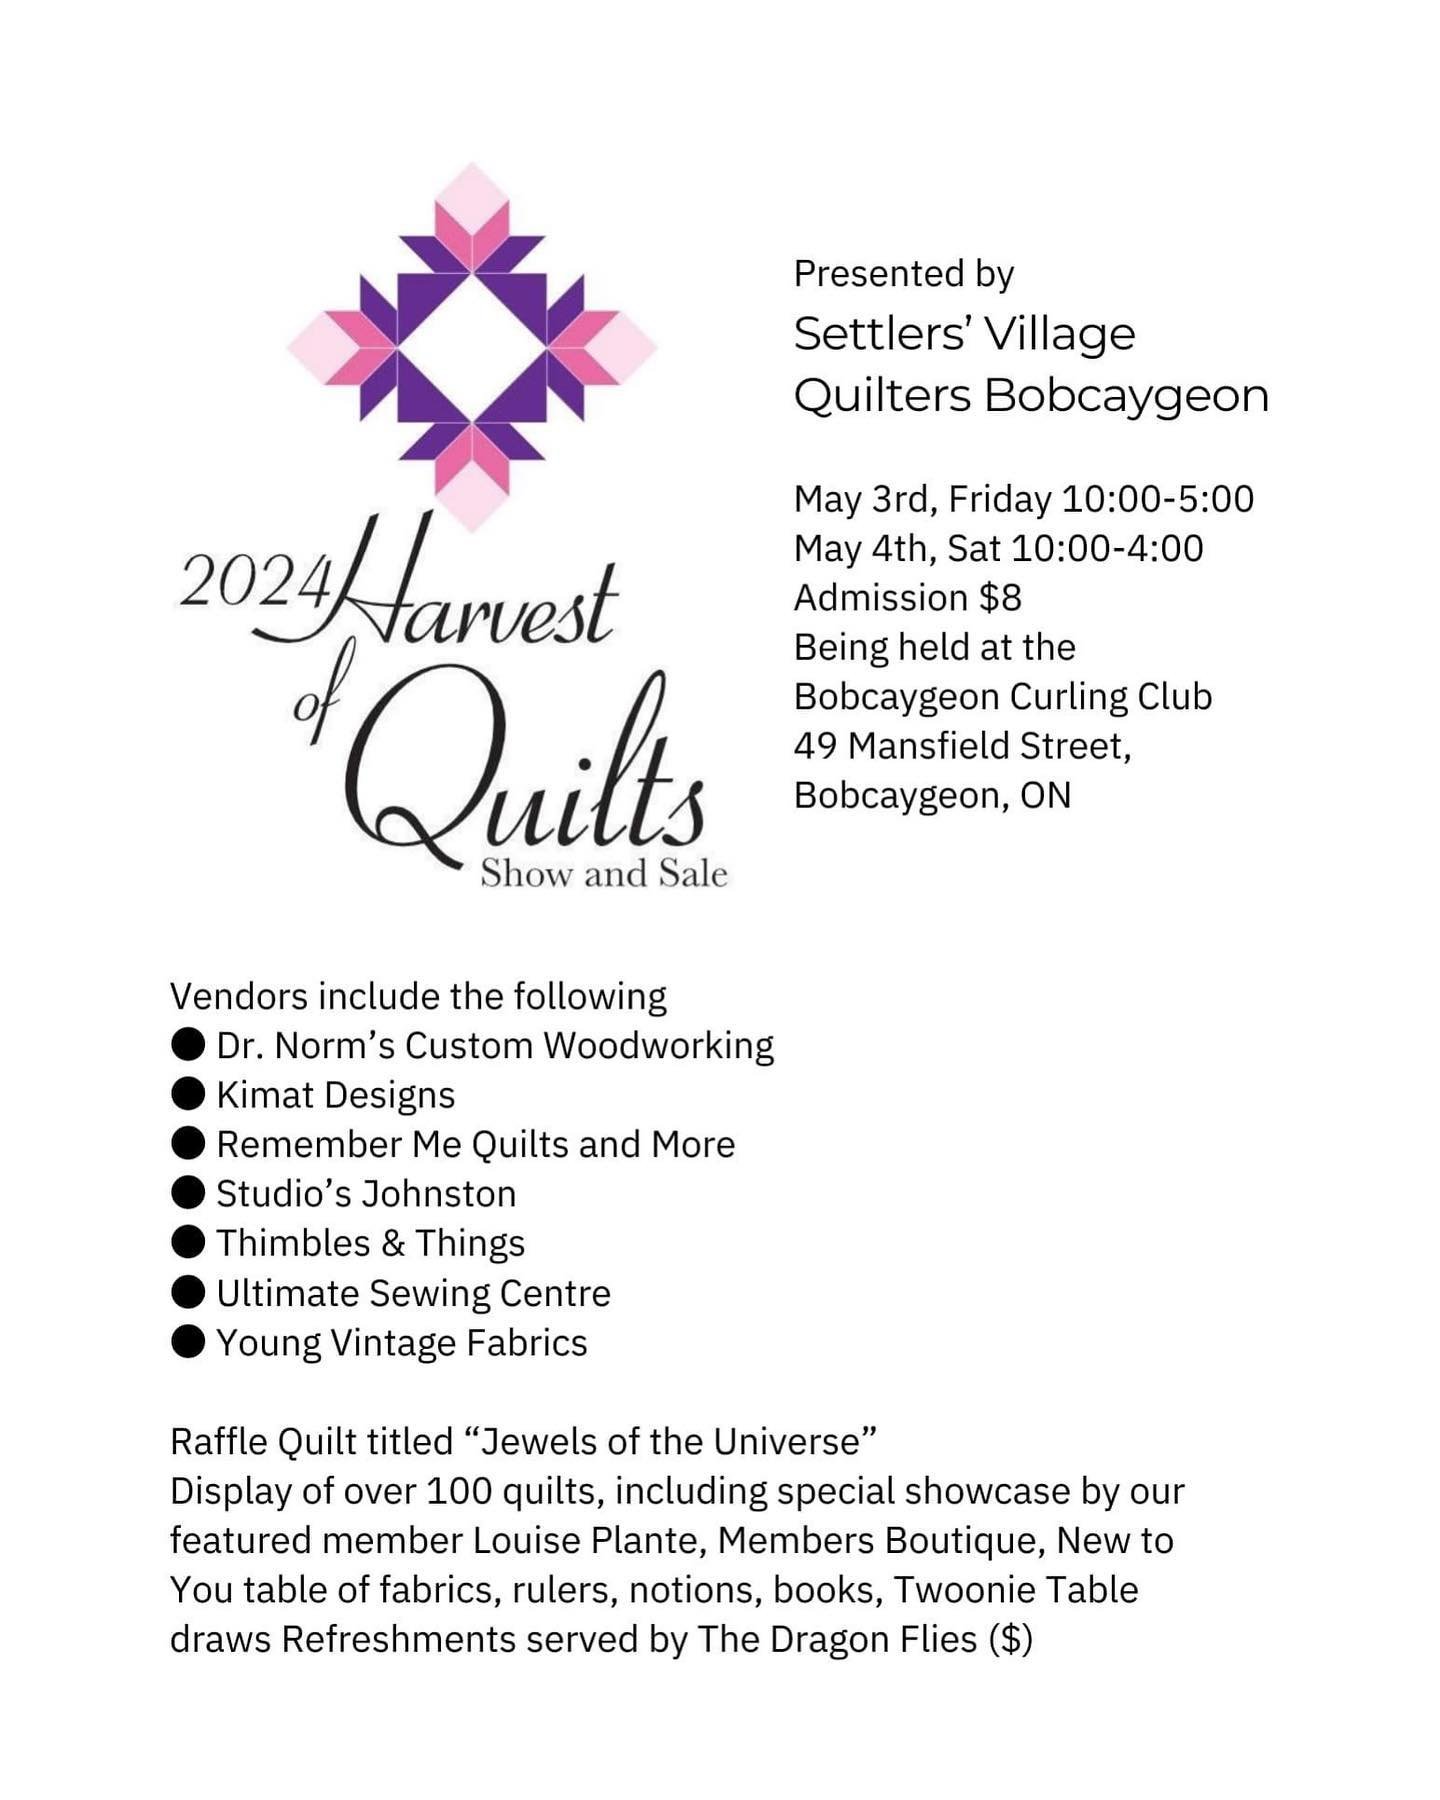 2024 Harvest of Quilts Show &amp; Sale happening this weekend at the Bobcaygeon Curling Club🪡🧵 Celine check out these talented artists!